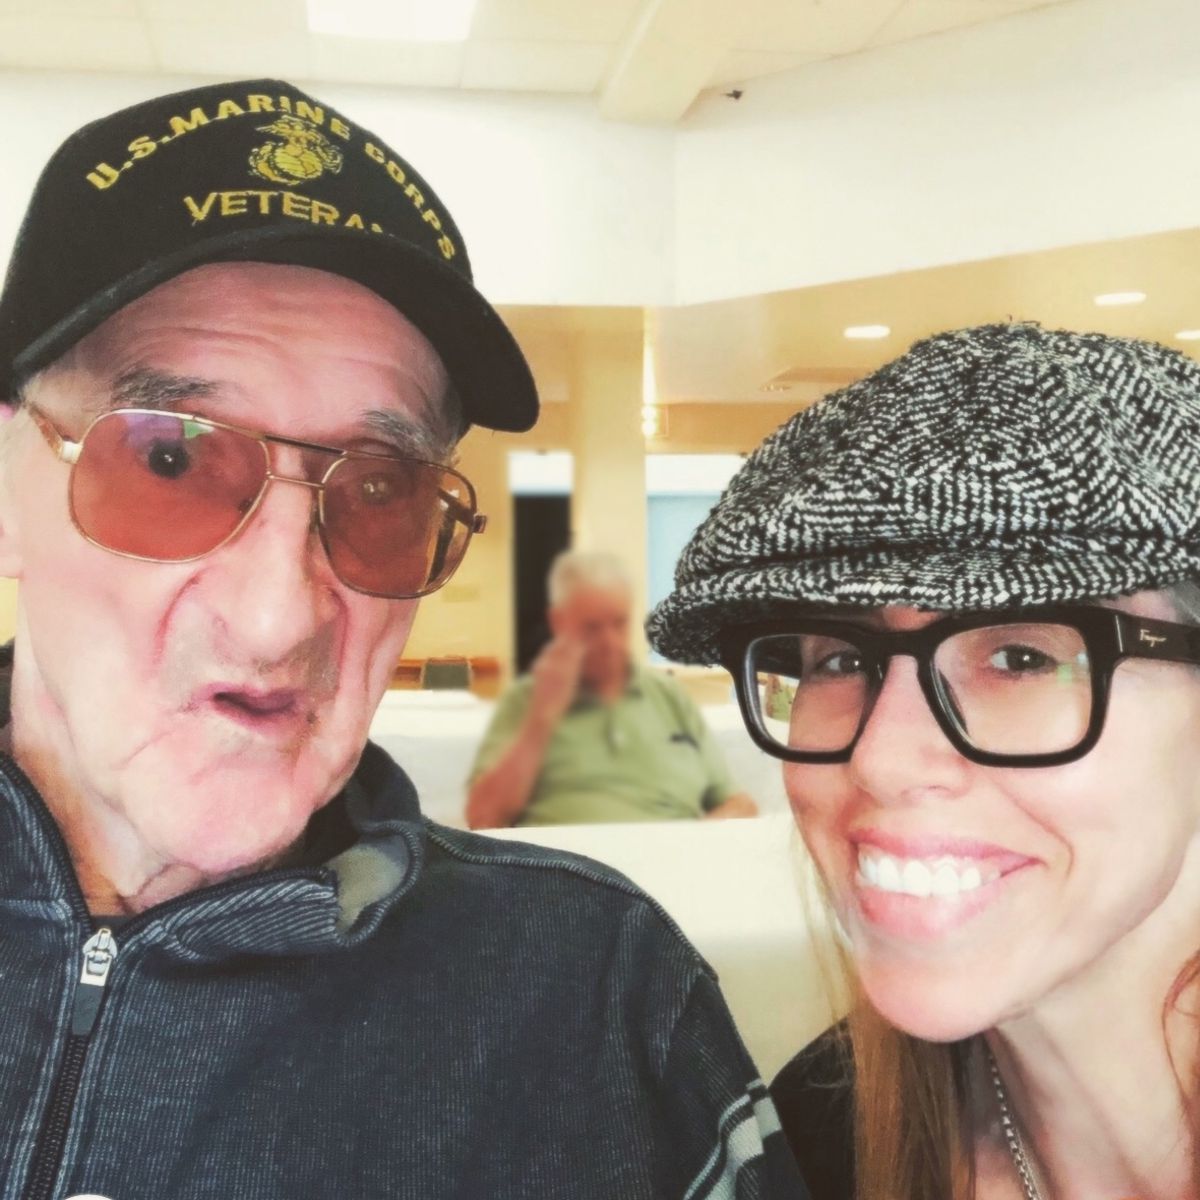 Stephen Durnin, 85, with his niece and health-care proxy, Colleen Hanley. Durnin, a former Marine and Korean War veteran, died at St. Albans on April 22, 2020. His death certificate listed cardiac arrest as the primary cause, with COVID-19 a contributing factor.